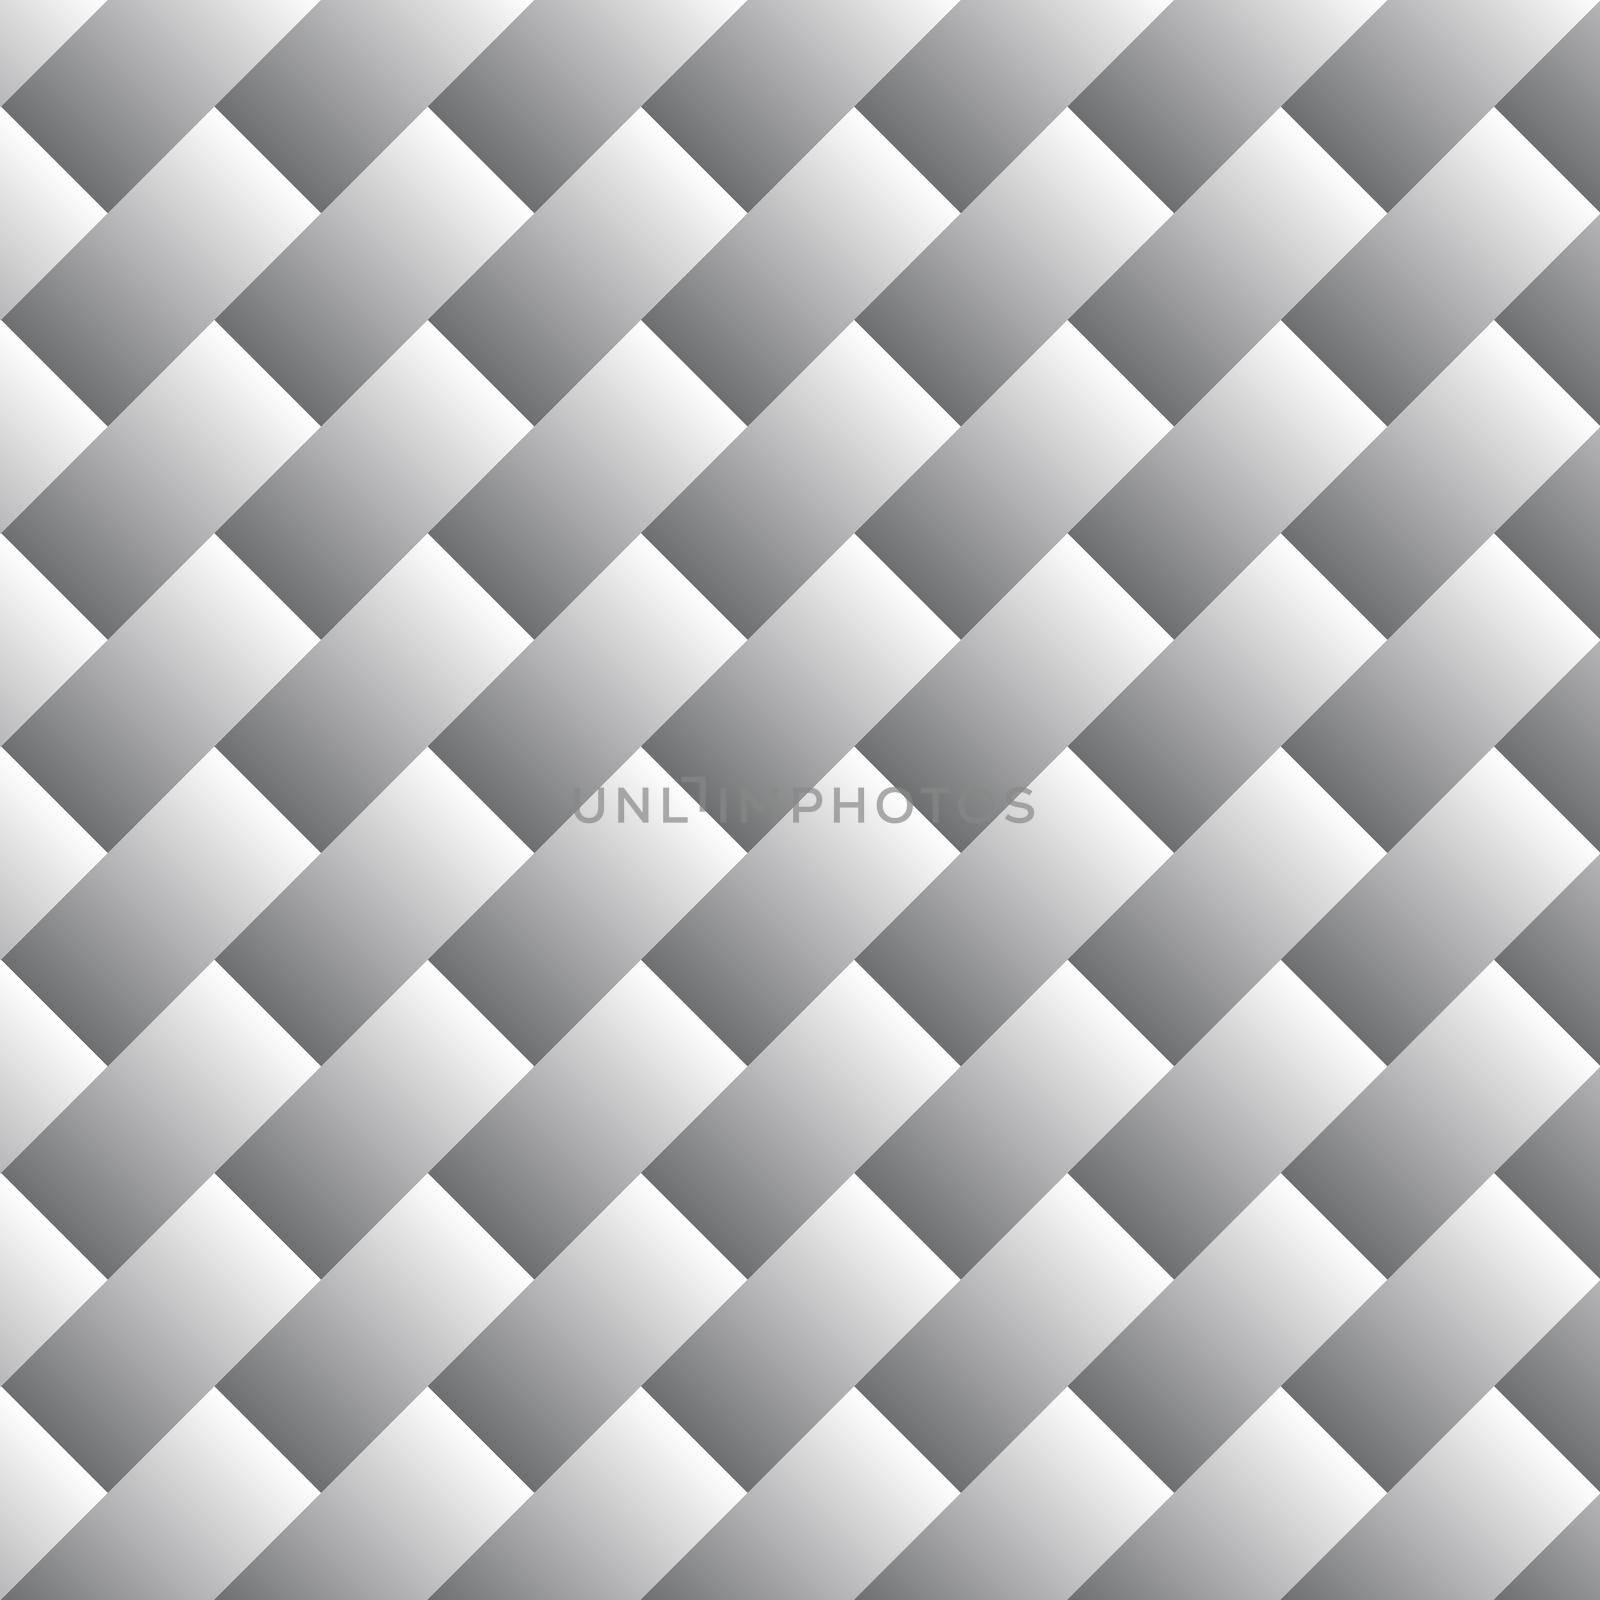 Diagonal gray gradient seamless texture. Modern stylish pattern sequence of weaving strips. Monochrome geometric ornament laying rectangles. Jpeg illustration by Fyuriy